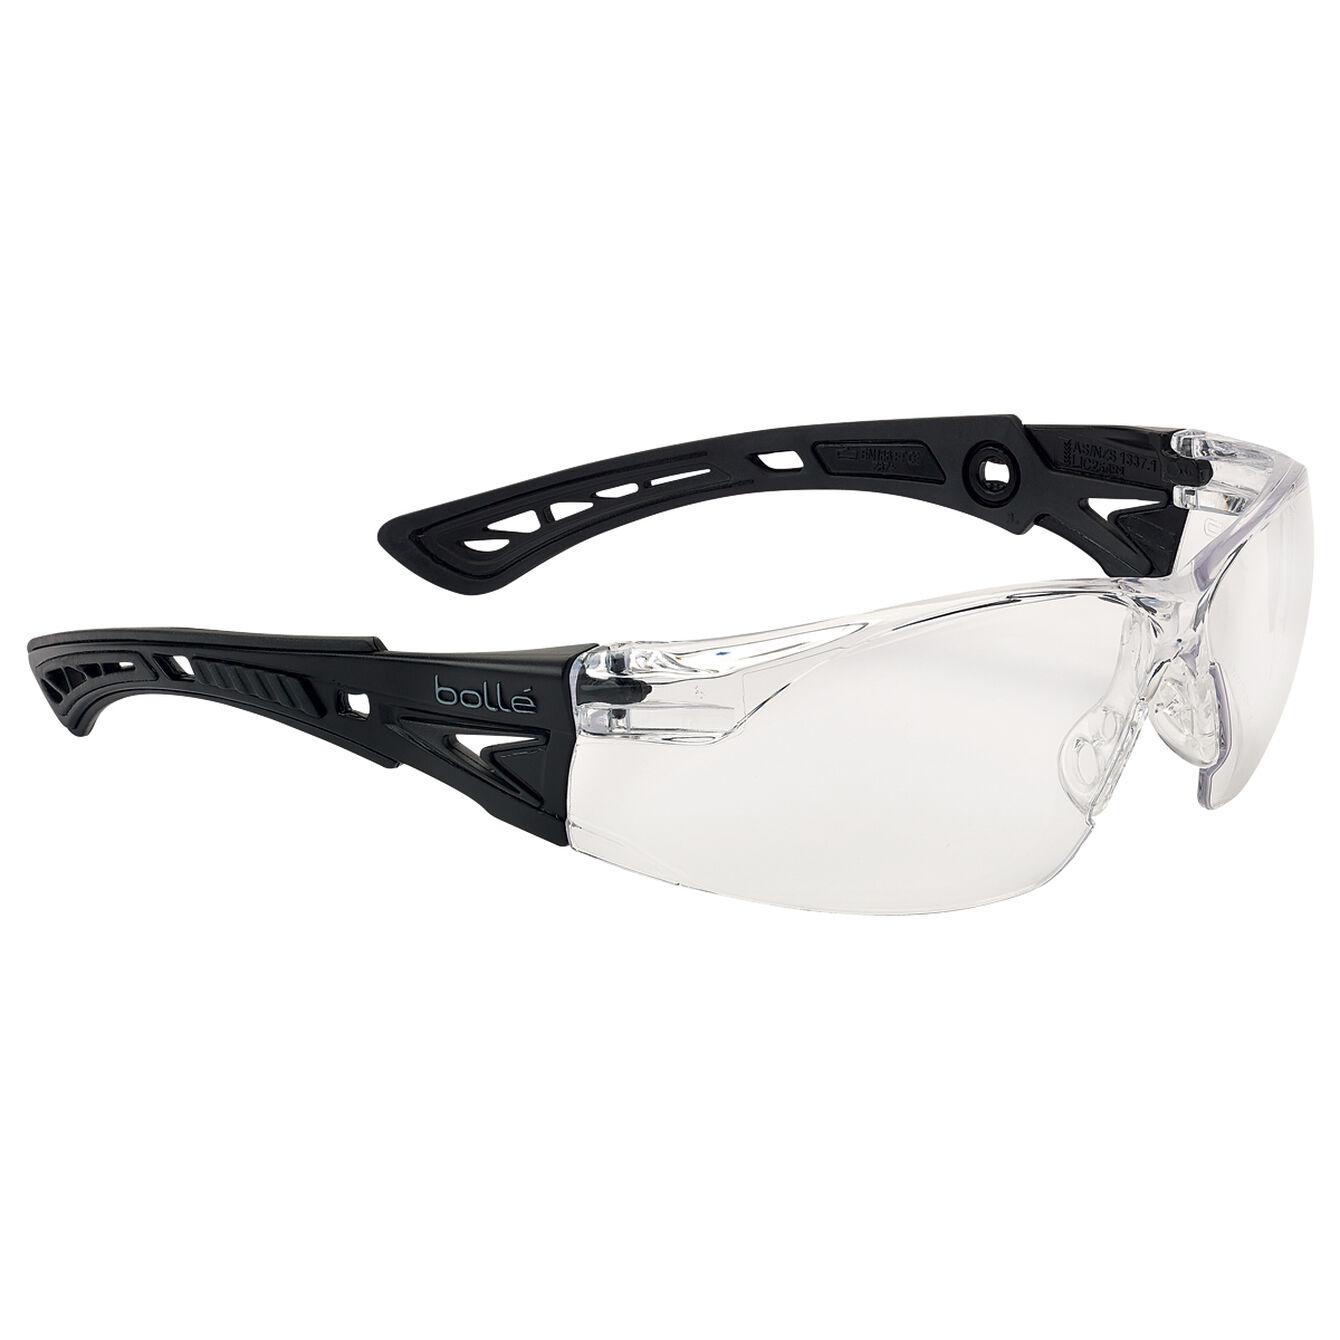 Bollé Safety RUSH+ Small BSSI safety glasses